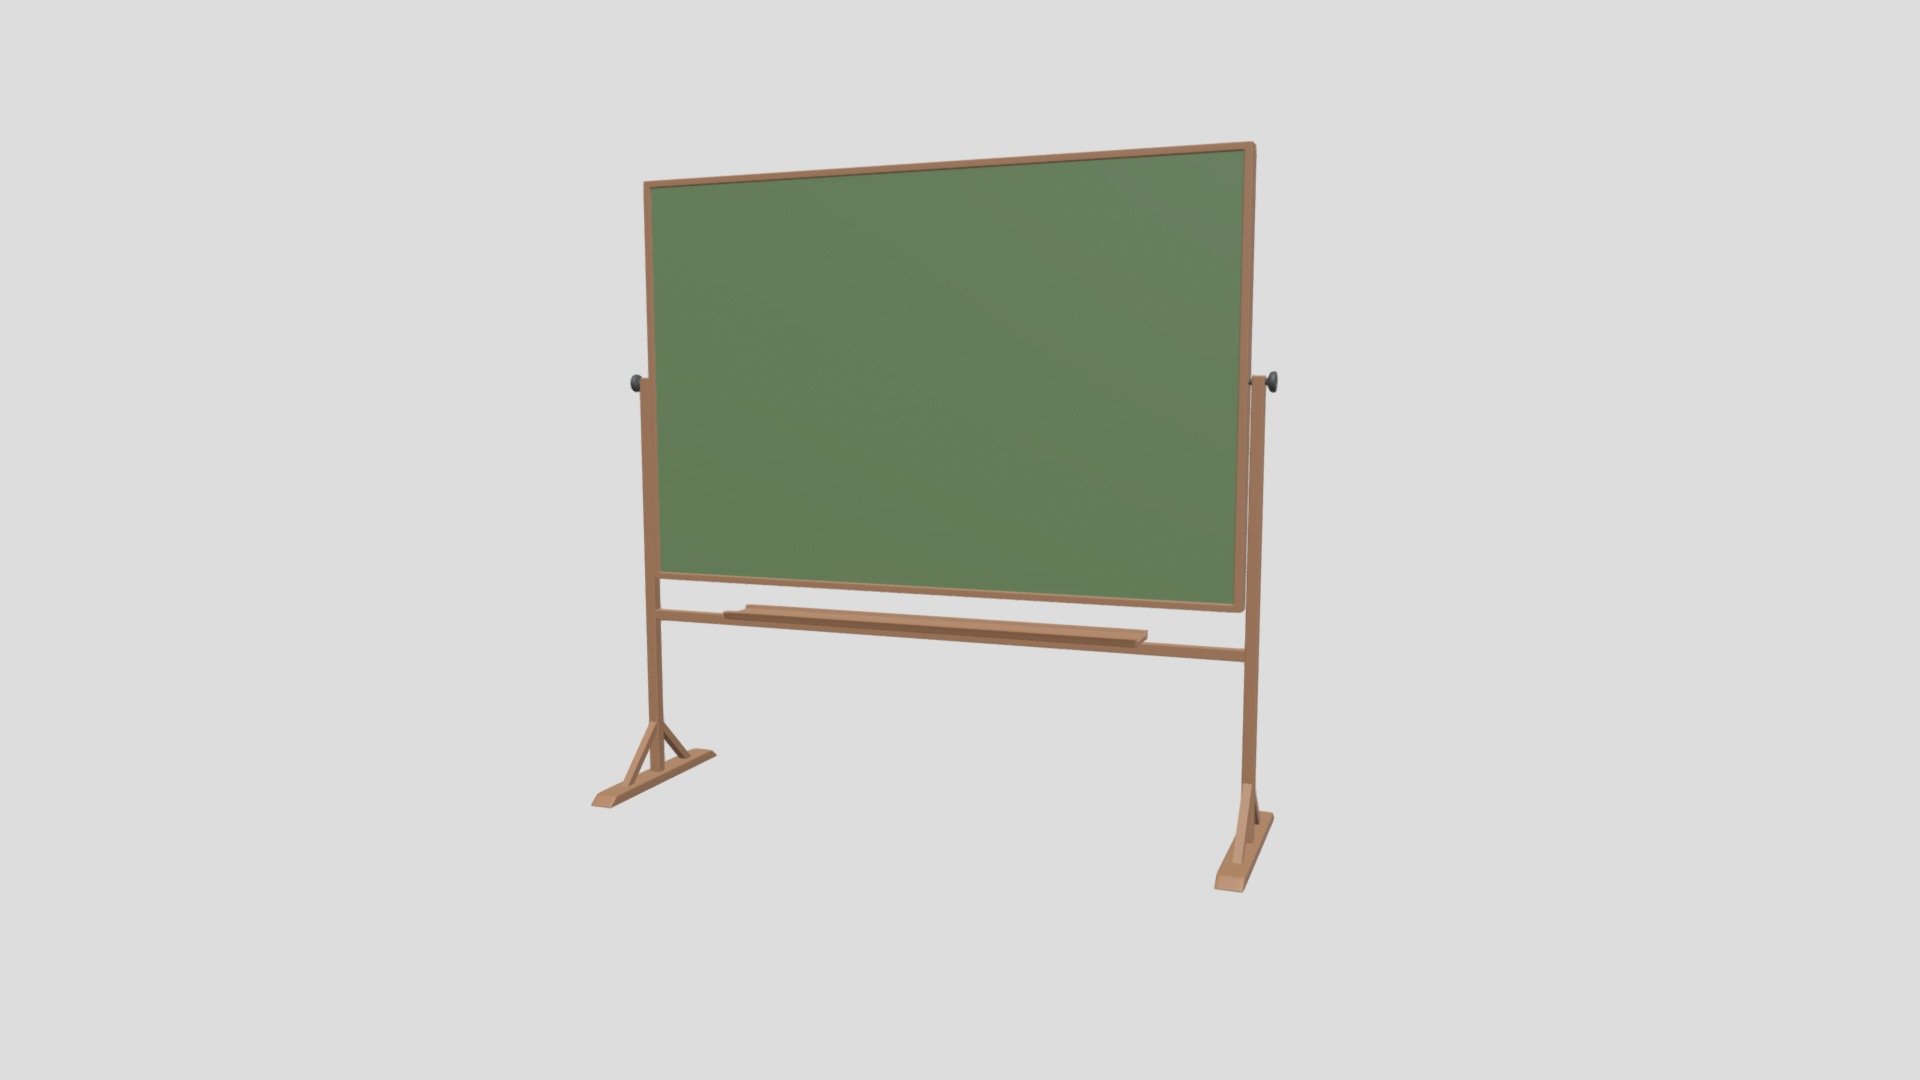 Subdivision Level: 2

Mirrored.

Textures: 1024 x 1024, Four colors on texture: Black, Brown, Green, White.

Materials: 2 - Chalkboard, Board.

Formats: .stl .obj .fbx .dae

Origin located on bottom-center 

Polygons: 15432

Vertices: 7822

I hope you enjoy the model! - Chalkboard - Buy Royalty Free 3D model by Ed+ (@EDplus) 3d model